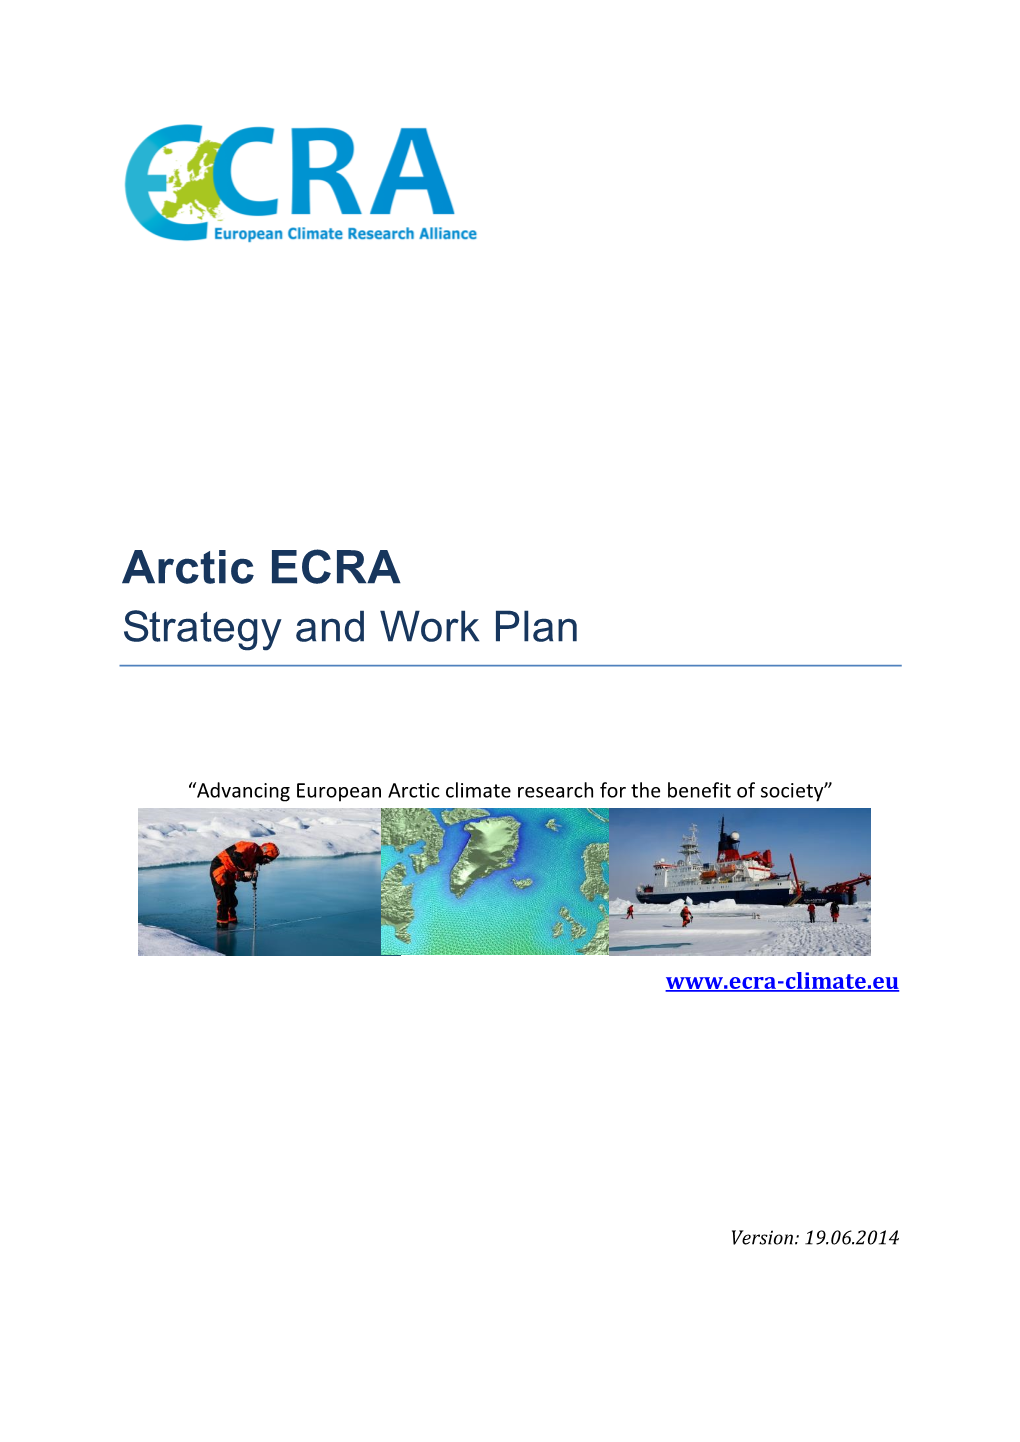 Arctic ECRA Strategy and Work Plan